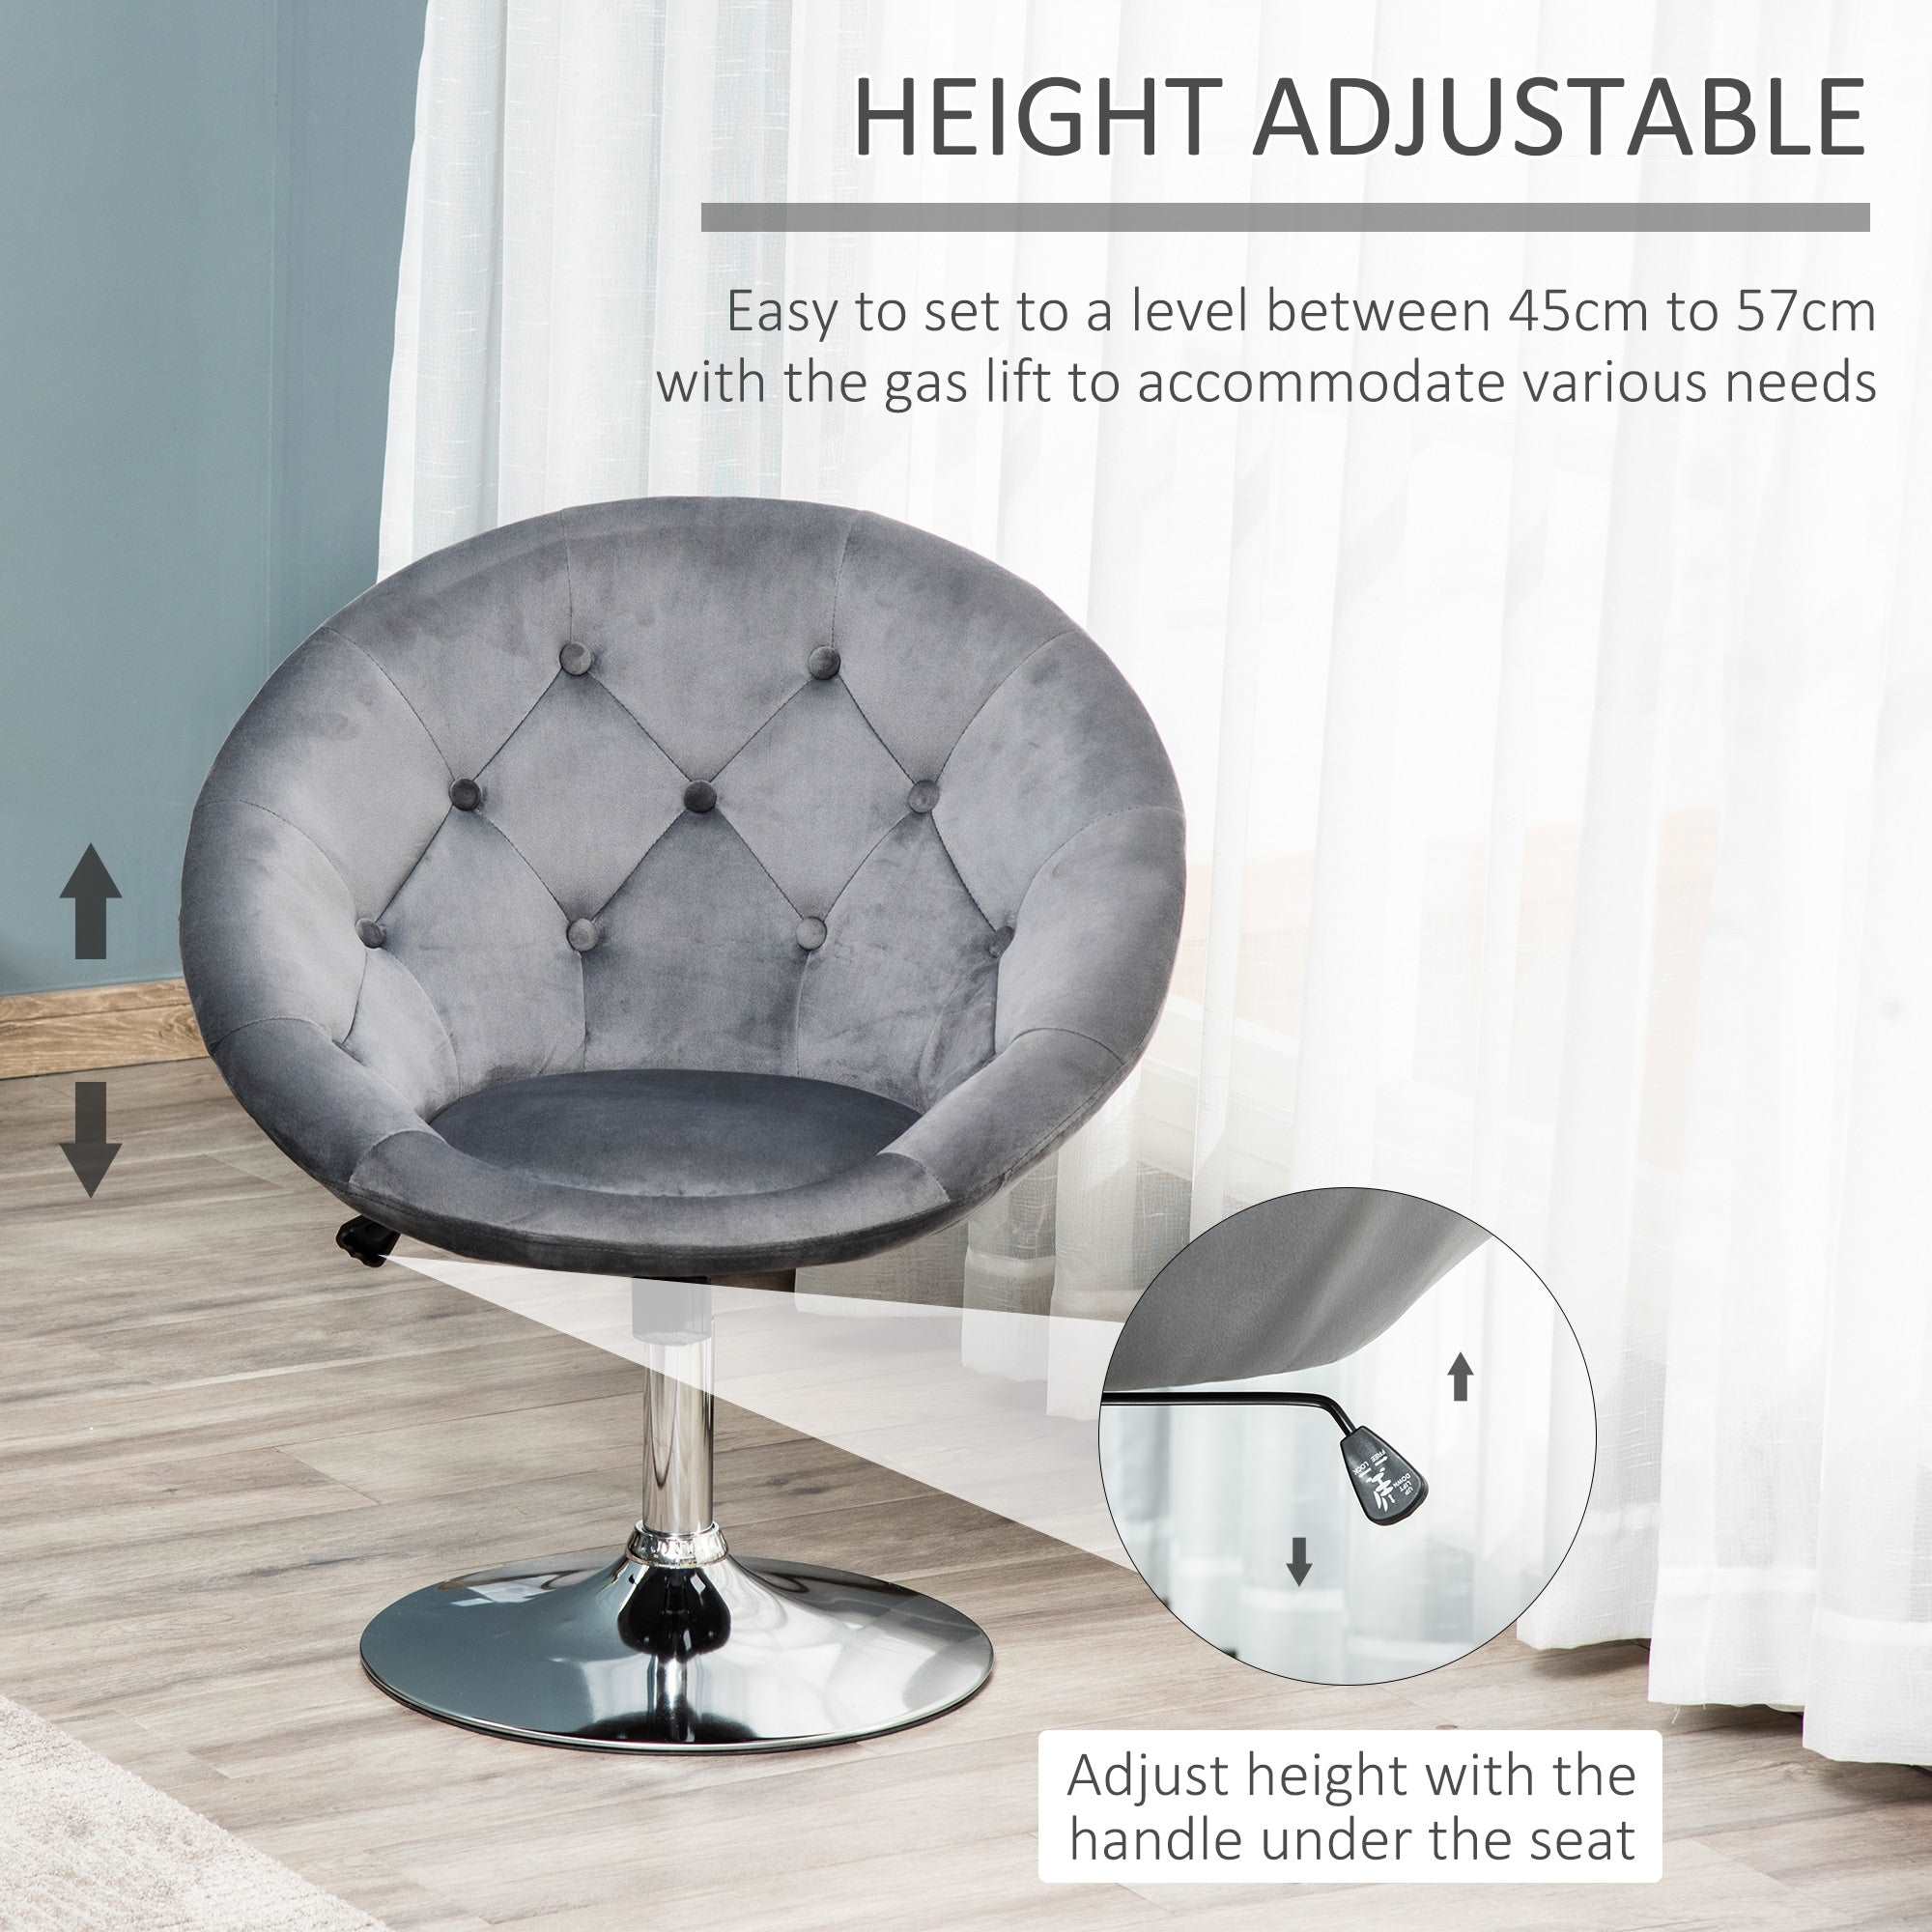 Modern Dining Height Bar Stool Velvet-Touch Tufted Fabric Adjustable Height Armless Tub Chair with Swivel Seat, Grey  AOSOM   